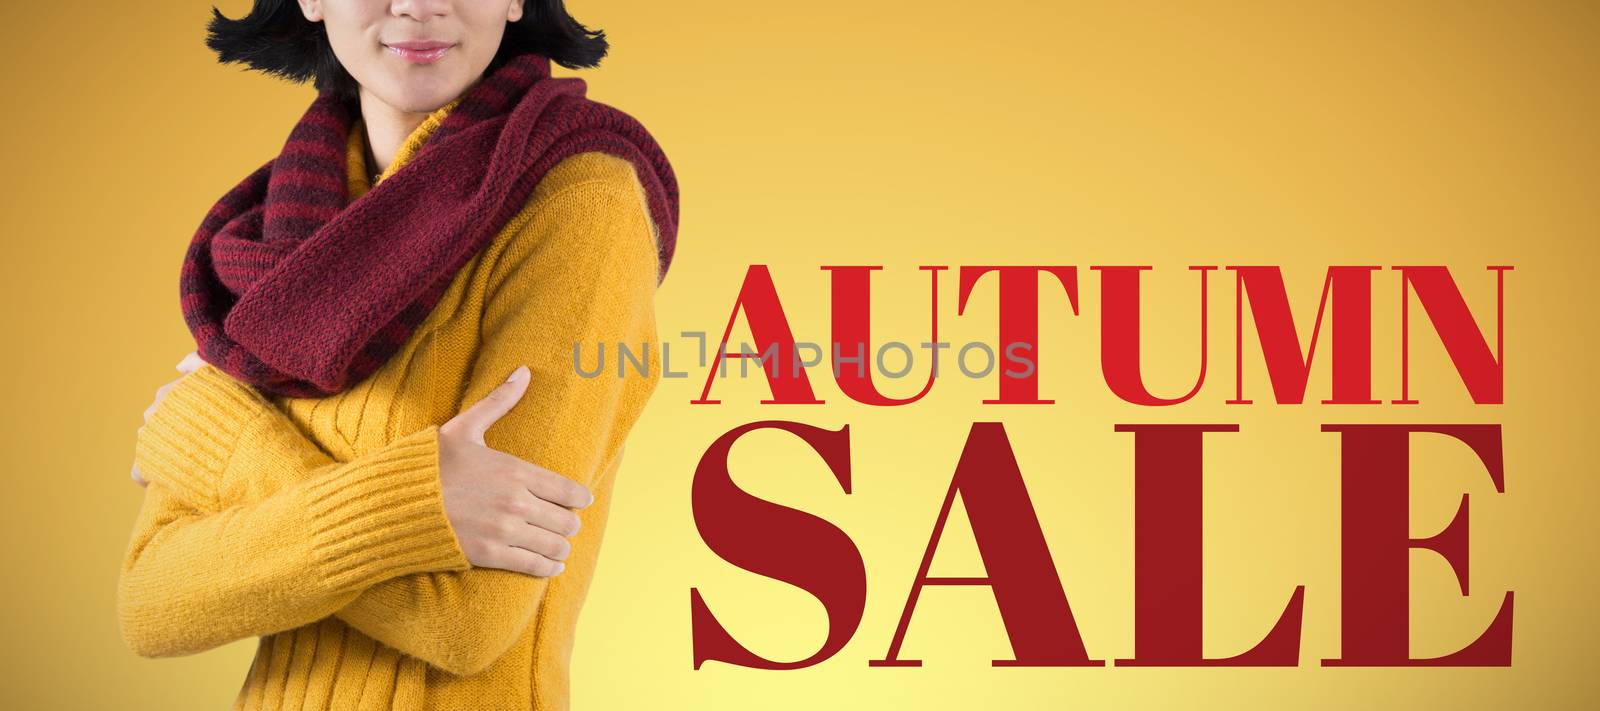 Woman in winter clothing posing against white background against abstract yellow background